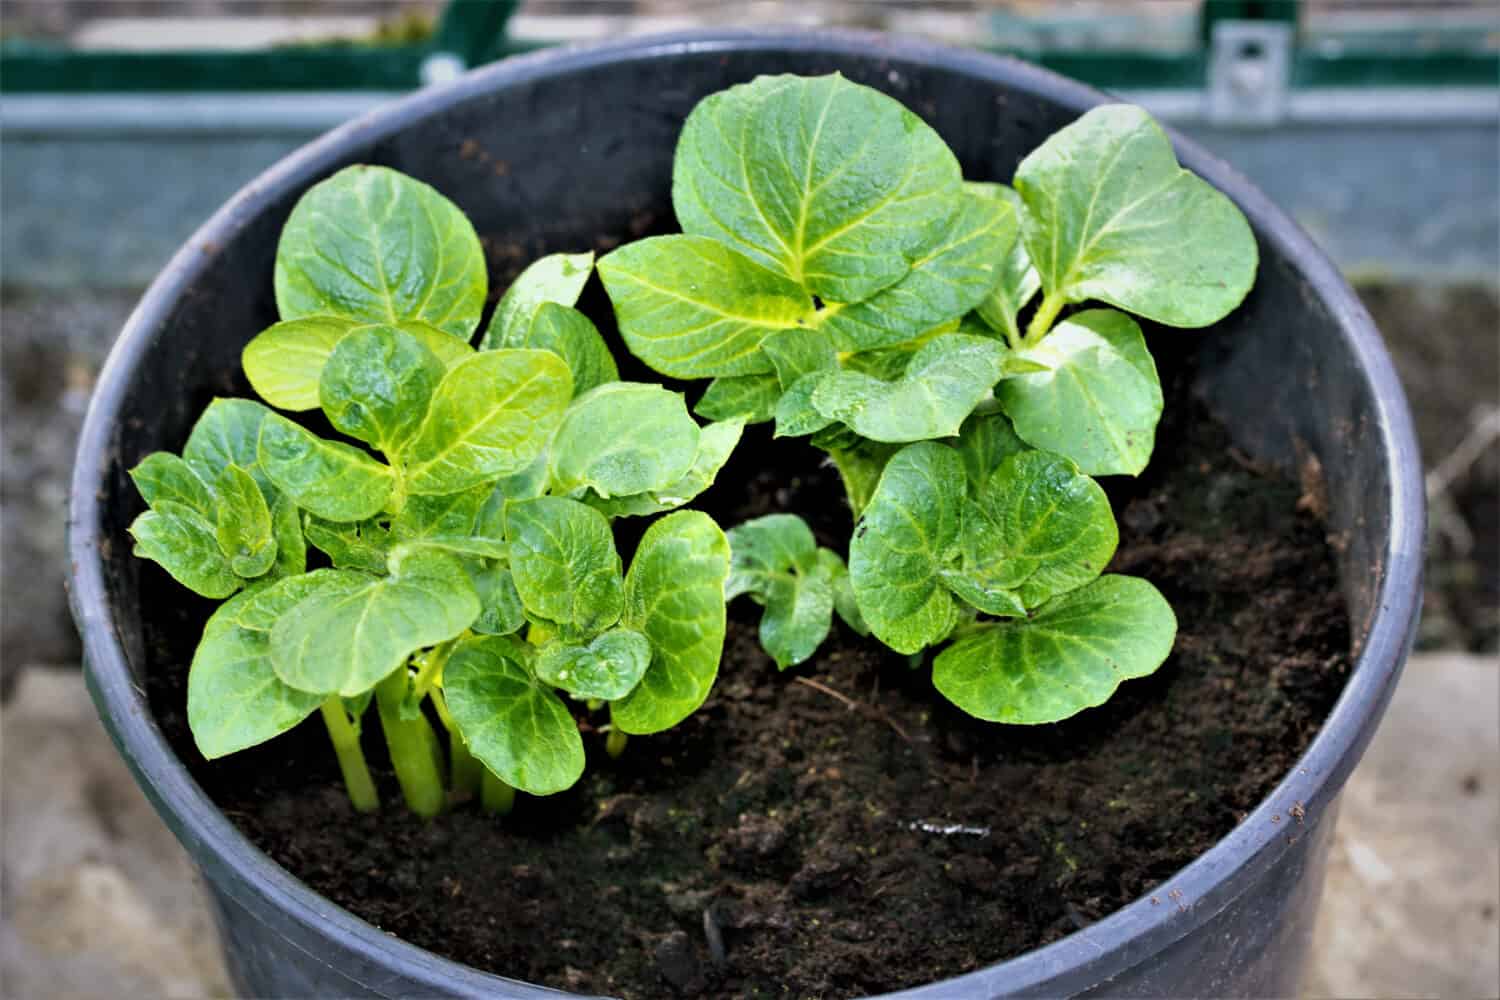 Sharpes Express spring early potatoes can be growing as early as March, if planted in a container within a greenhouse.